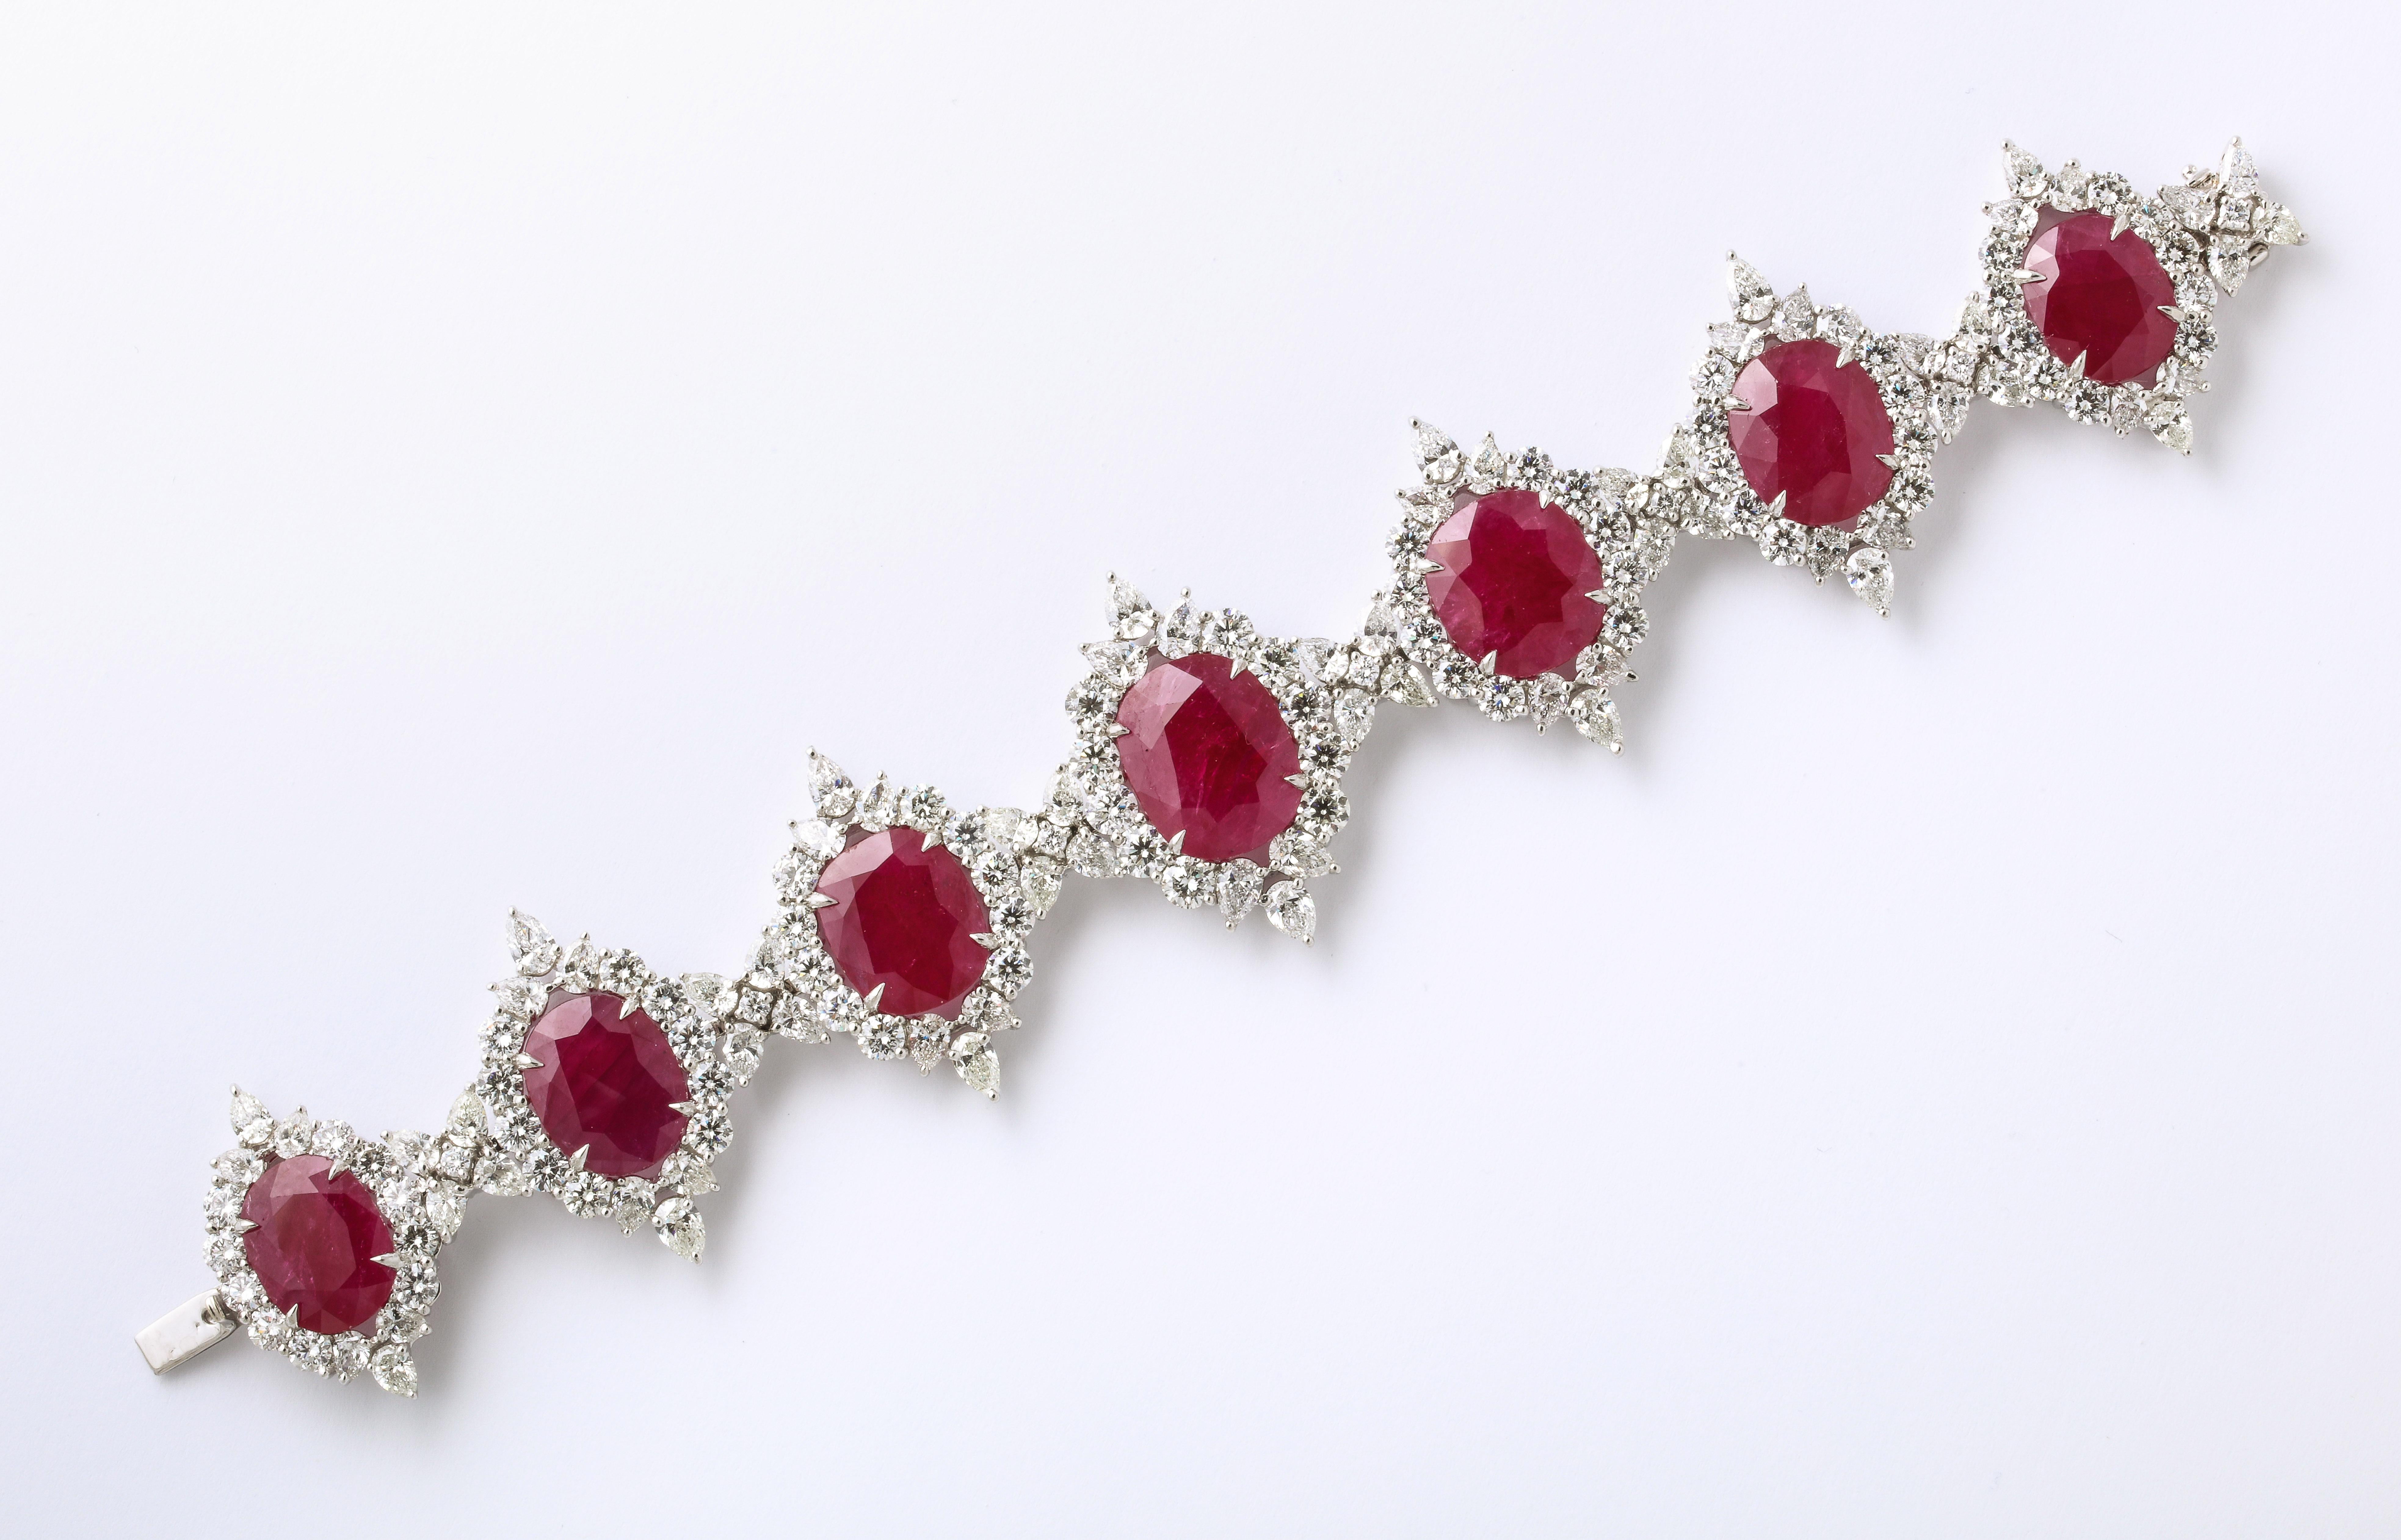 
An important Ruby and Diamond bracelet. 

68.70 carats of certified “Intense Red” Ruby 

30.71 carats of colorless pear shape and round brilliant cut diamonds. 

7.5 inches long, the center is just under 1.5 inches wide. 

Set in platinum